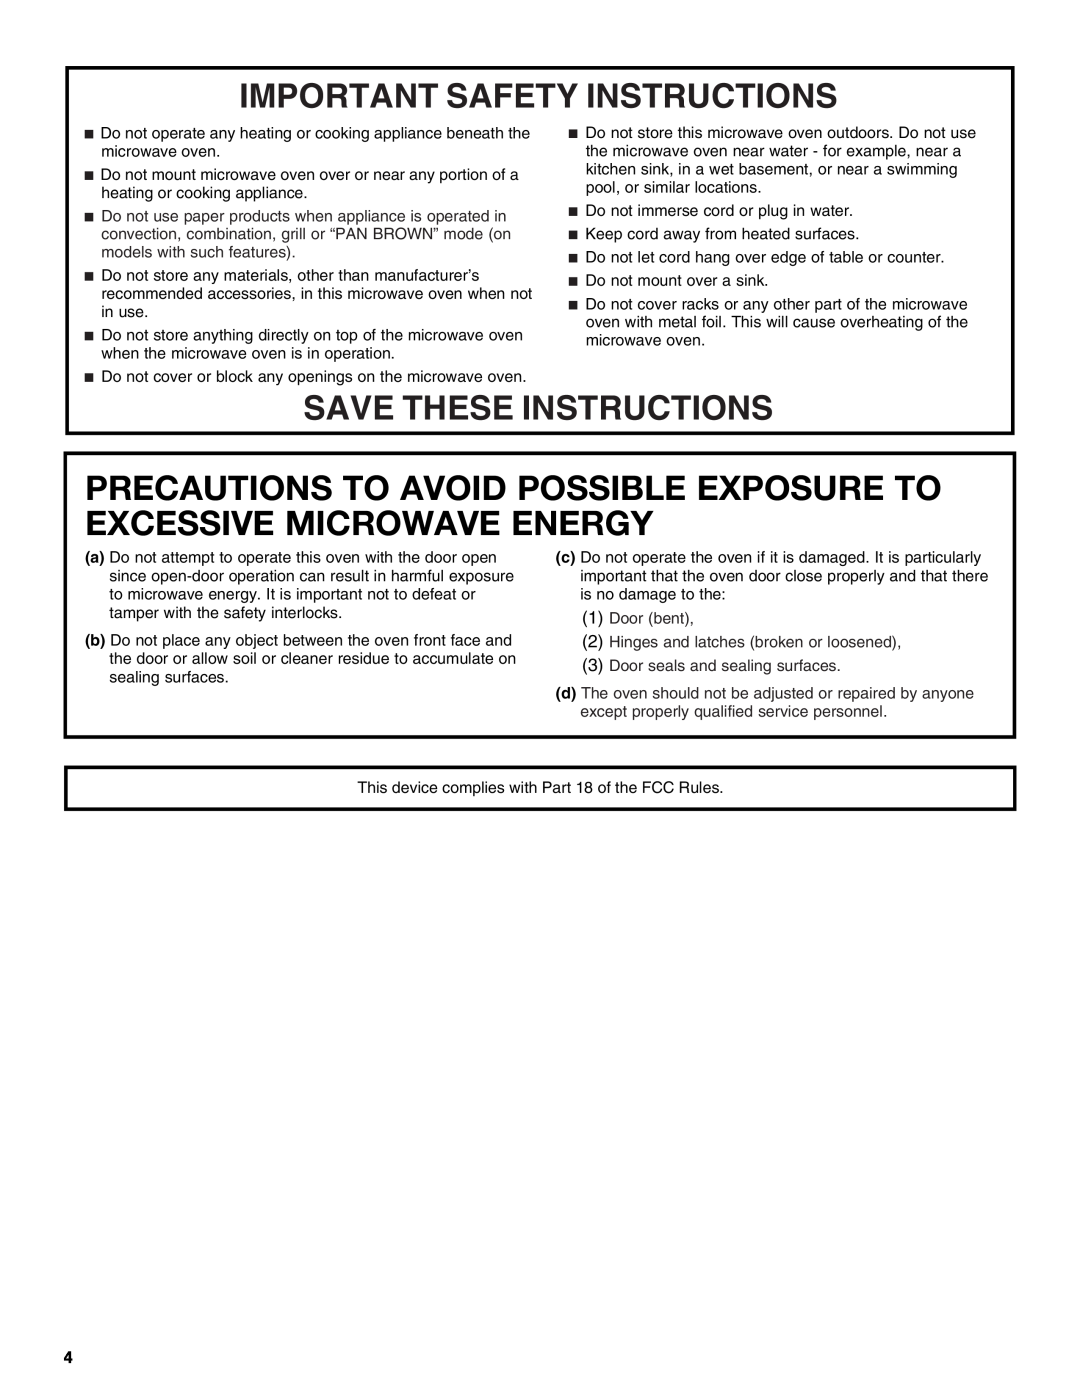 Whirlpool W10188233A Precautions To Avoid Possible Exposure To Excessive Microwave Energy, Important Safety Instructions 